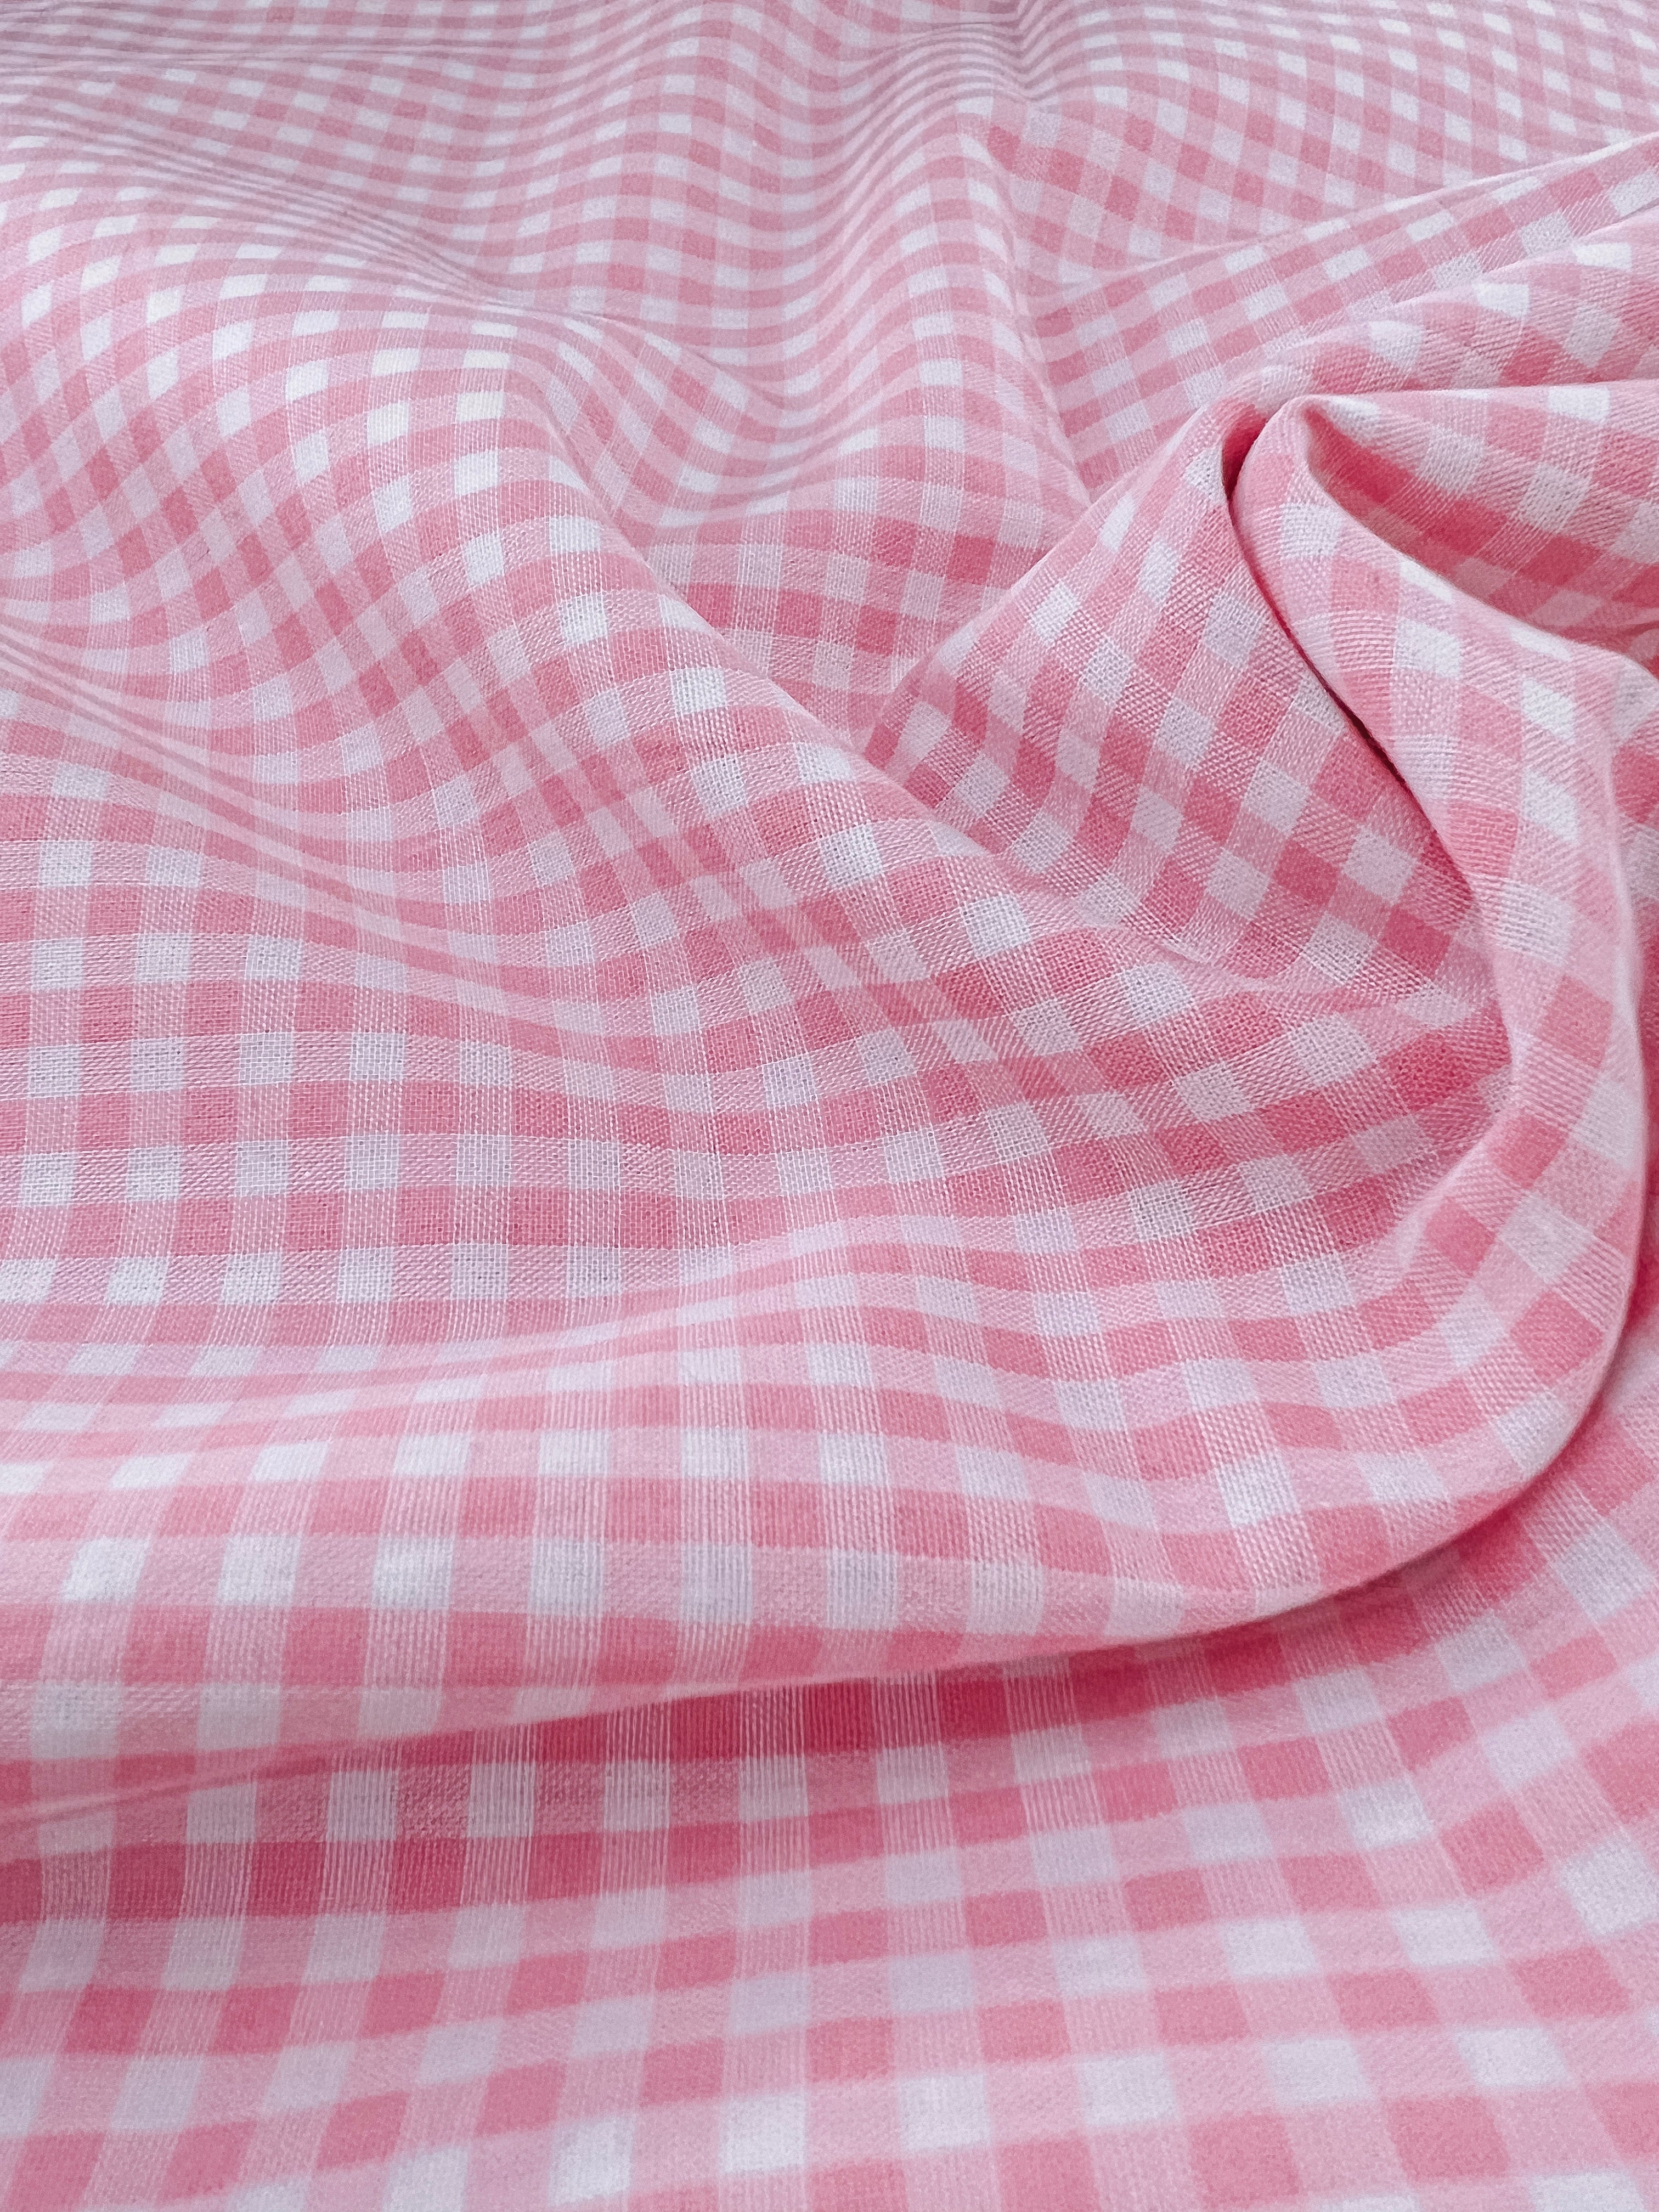 PALE PINK GINGHAM